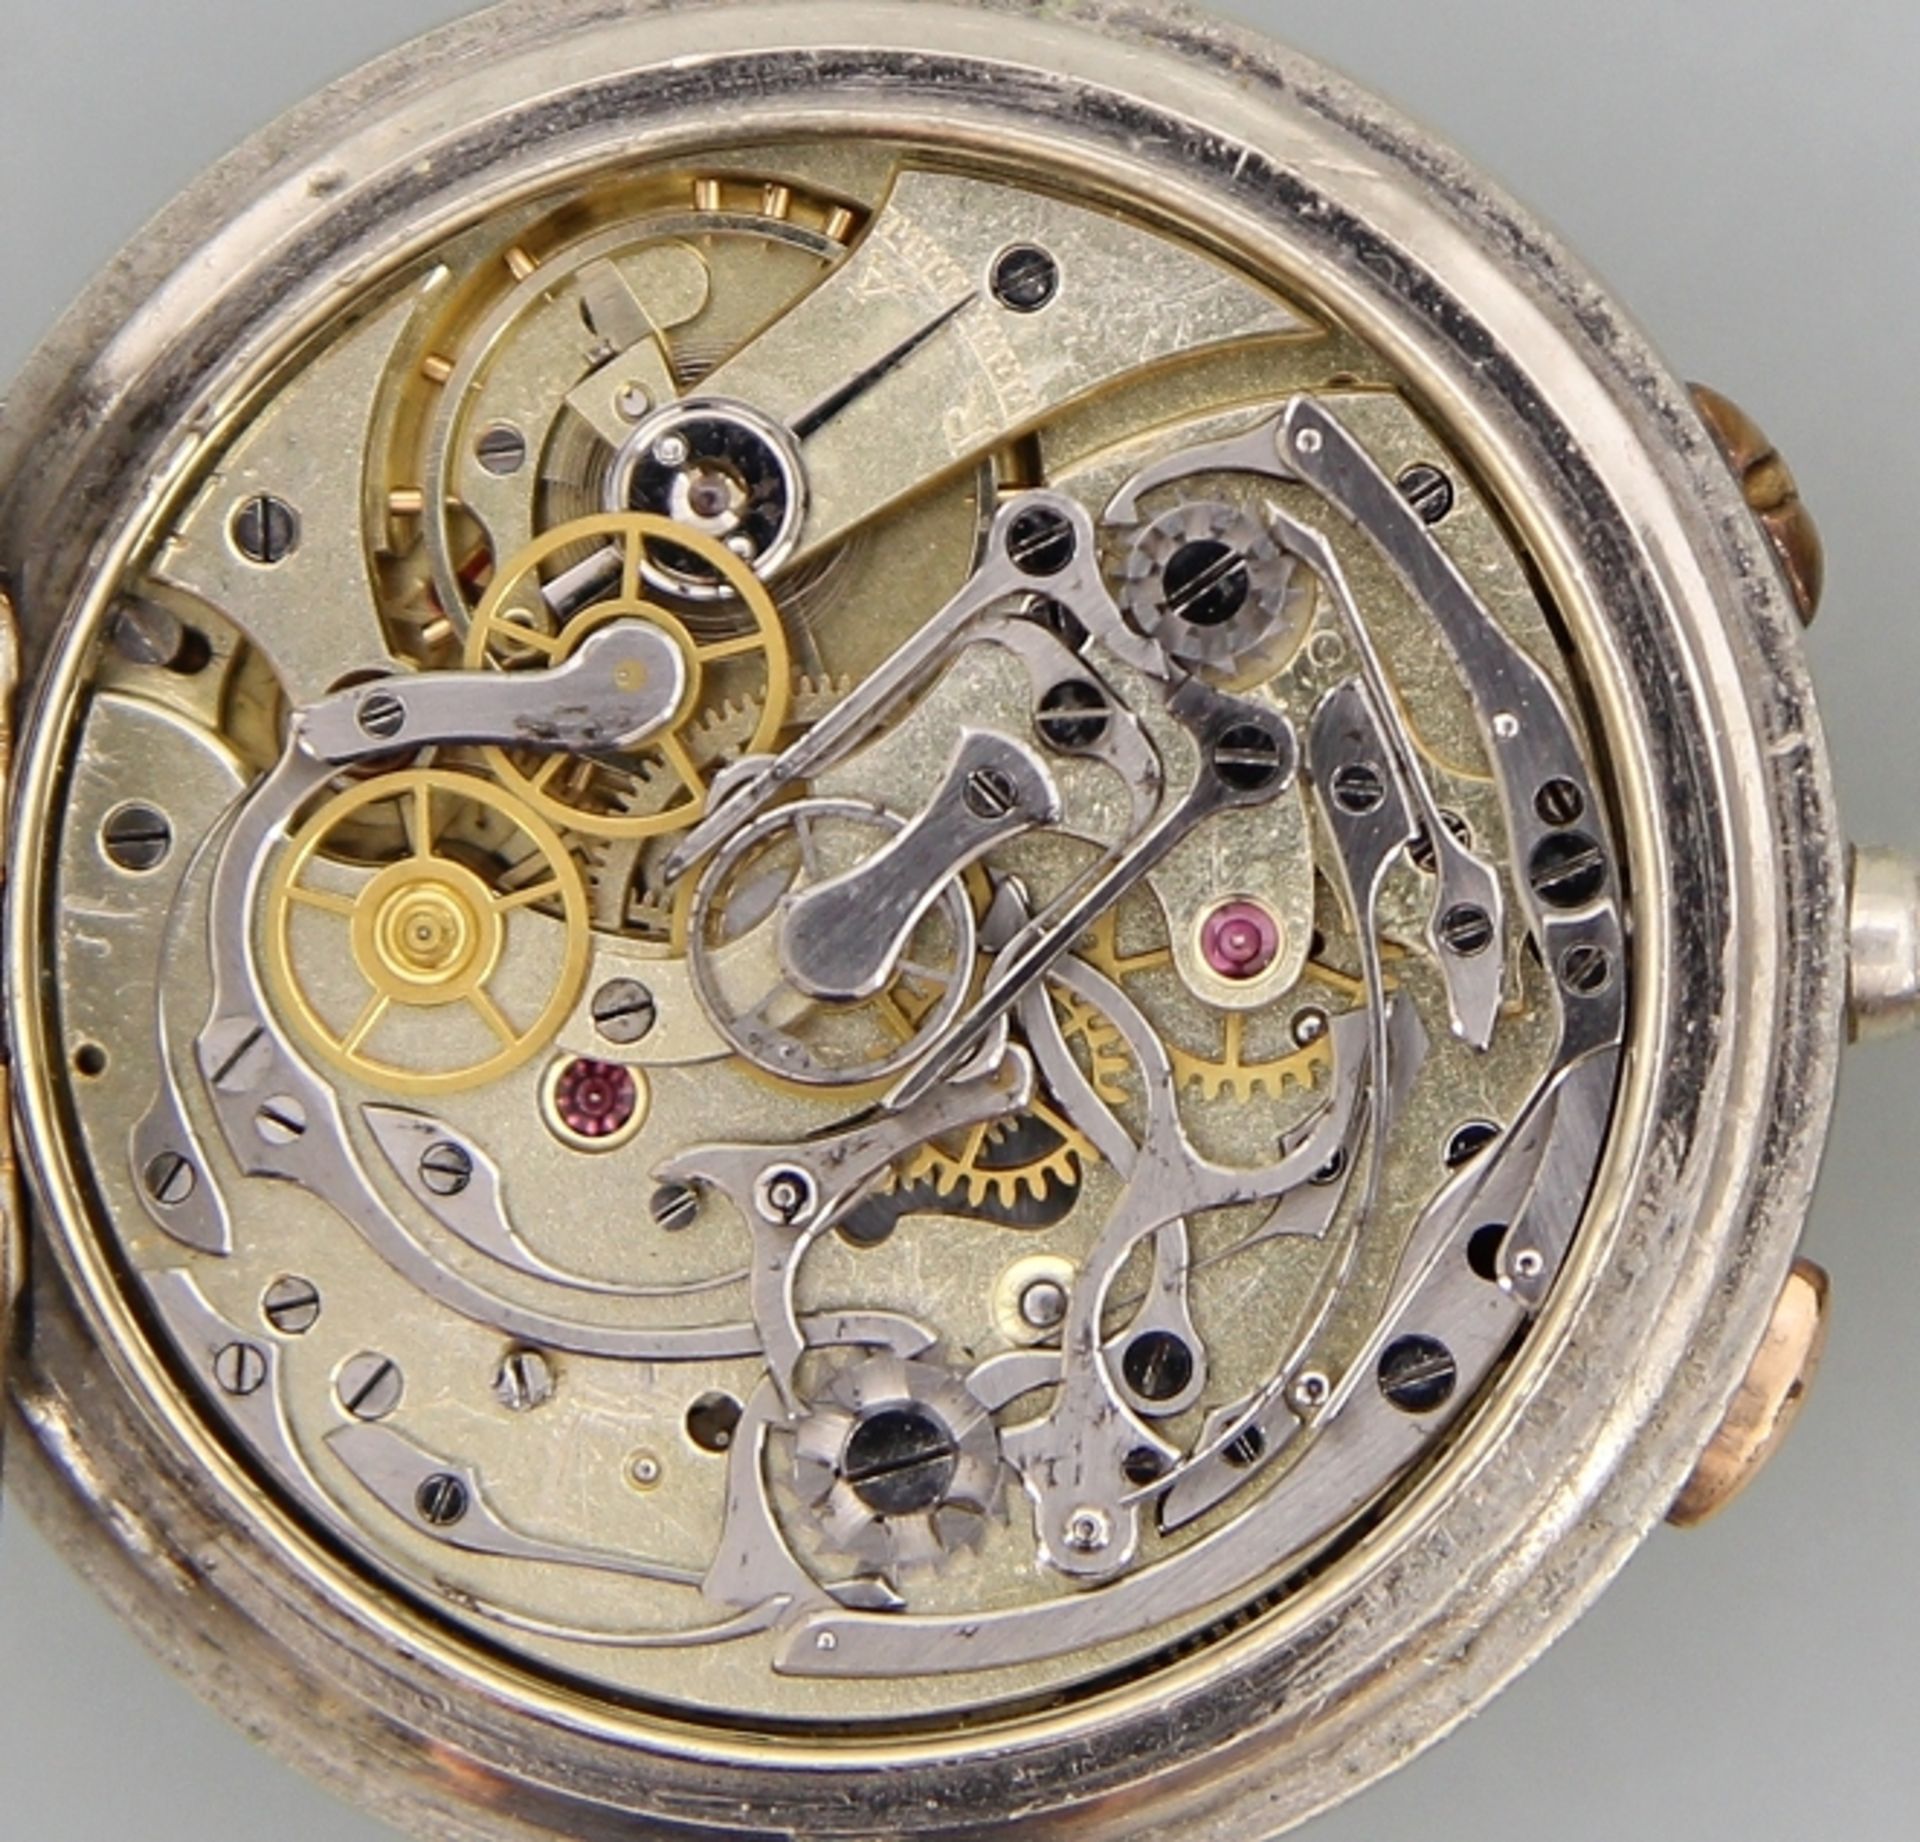 HTU - Rattrapante - Chronograph "Henry Moser" - Image 3 of 3